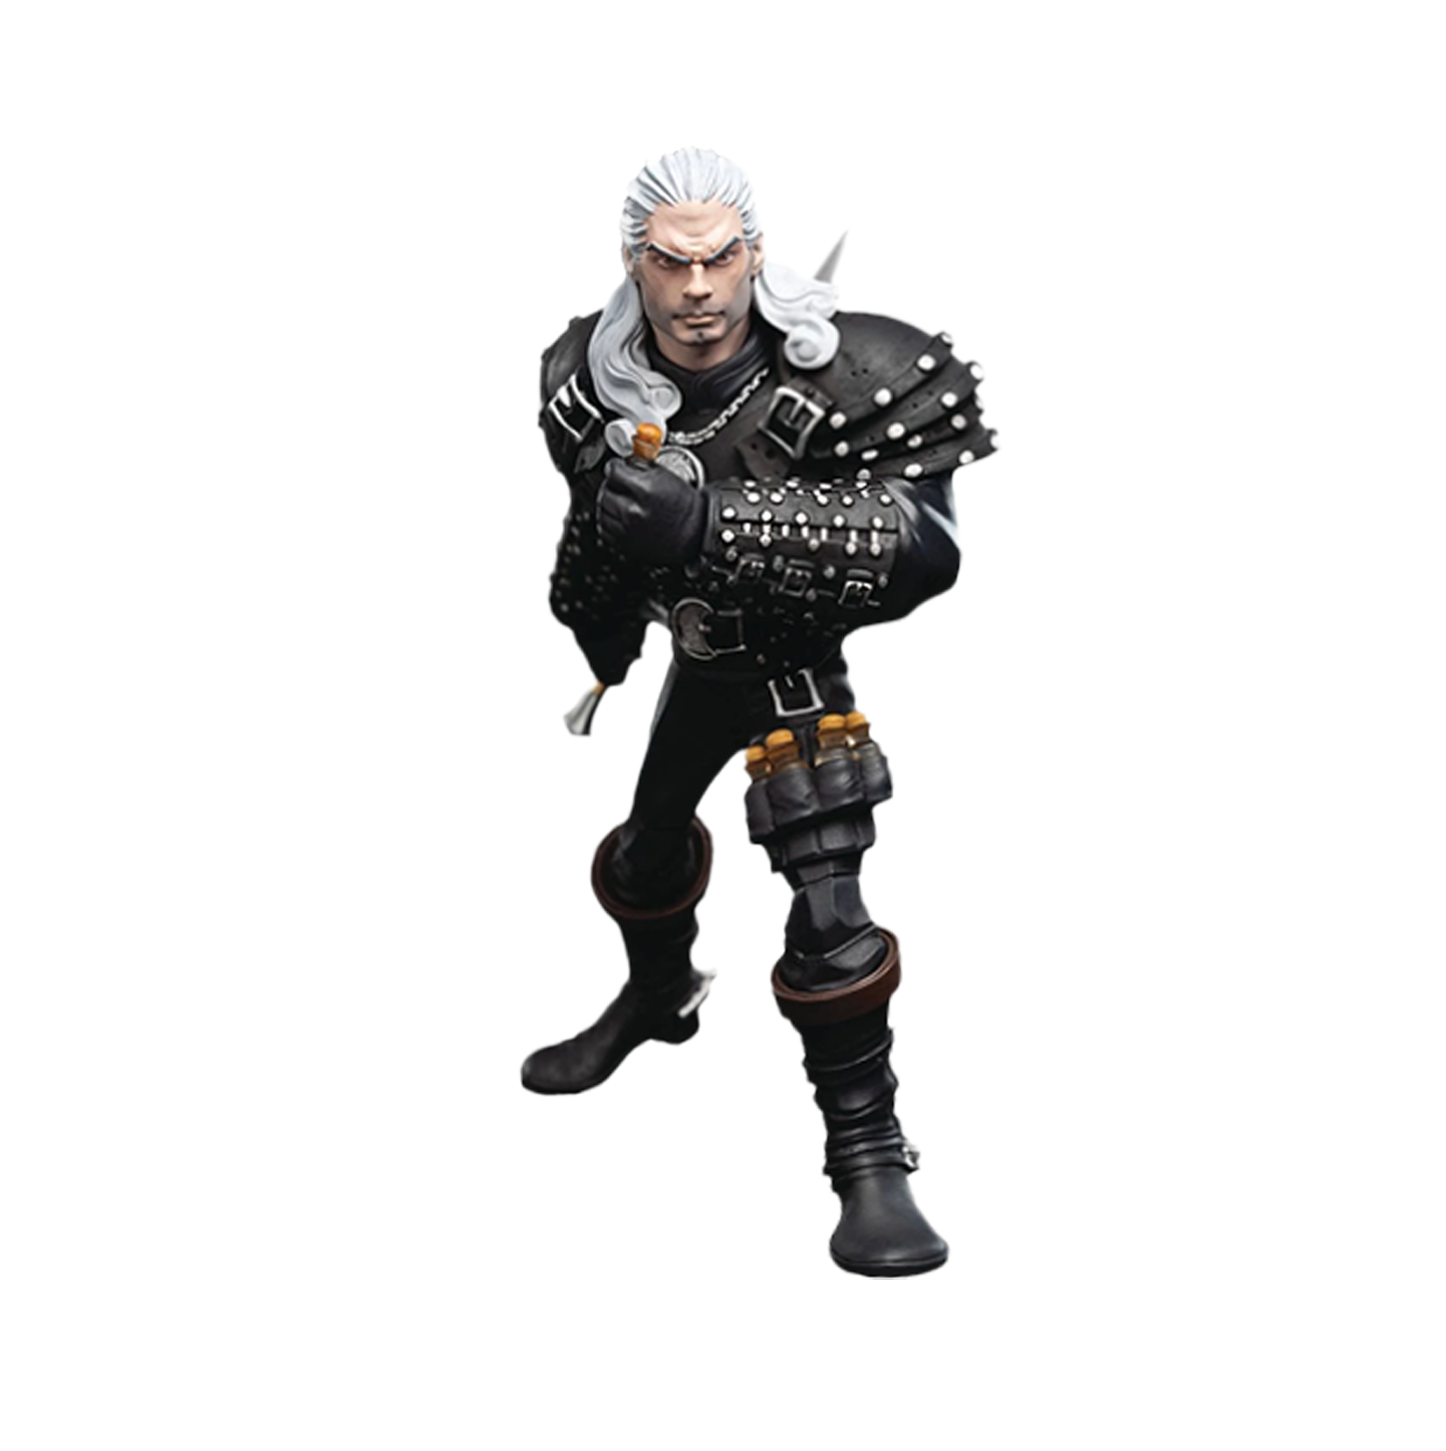 Weta Mini Epic figure of Geralt of Rivia character front view